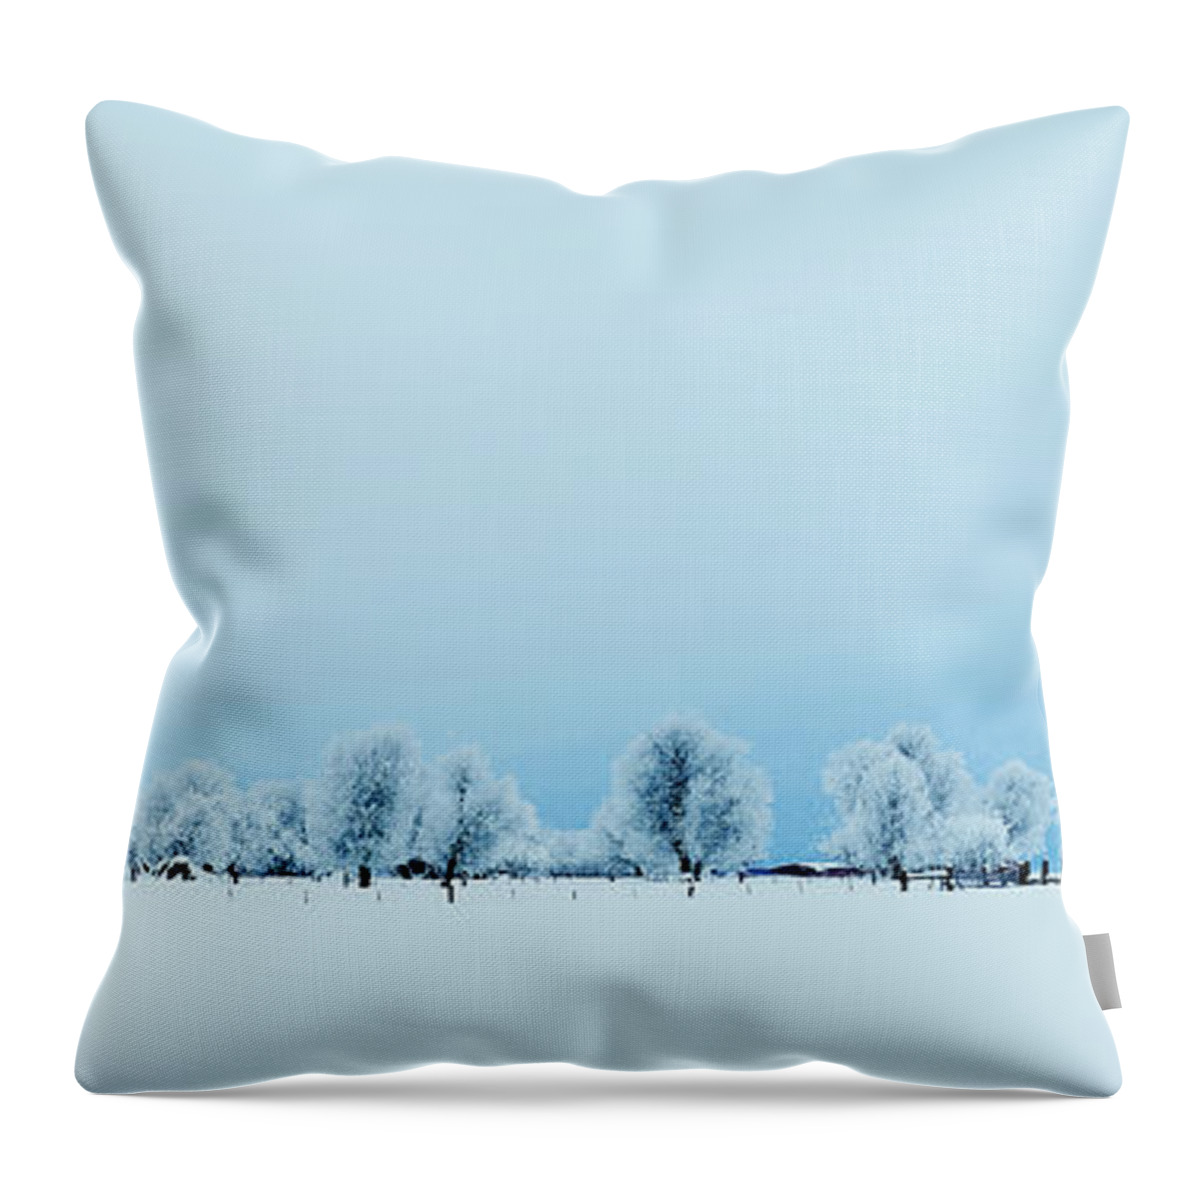 Tranquility Throw Pillow featuring the photograph Winter Farm by Henry@scenicfoto.com